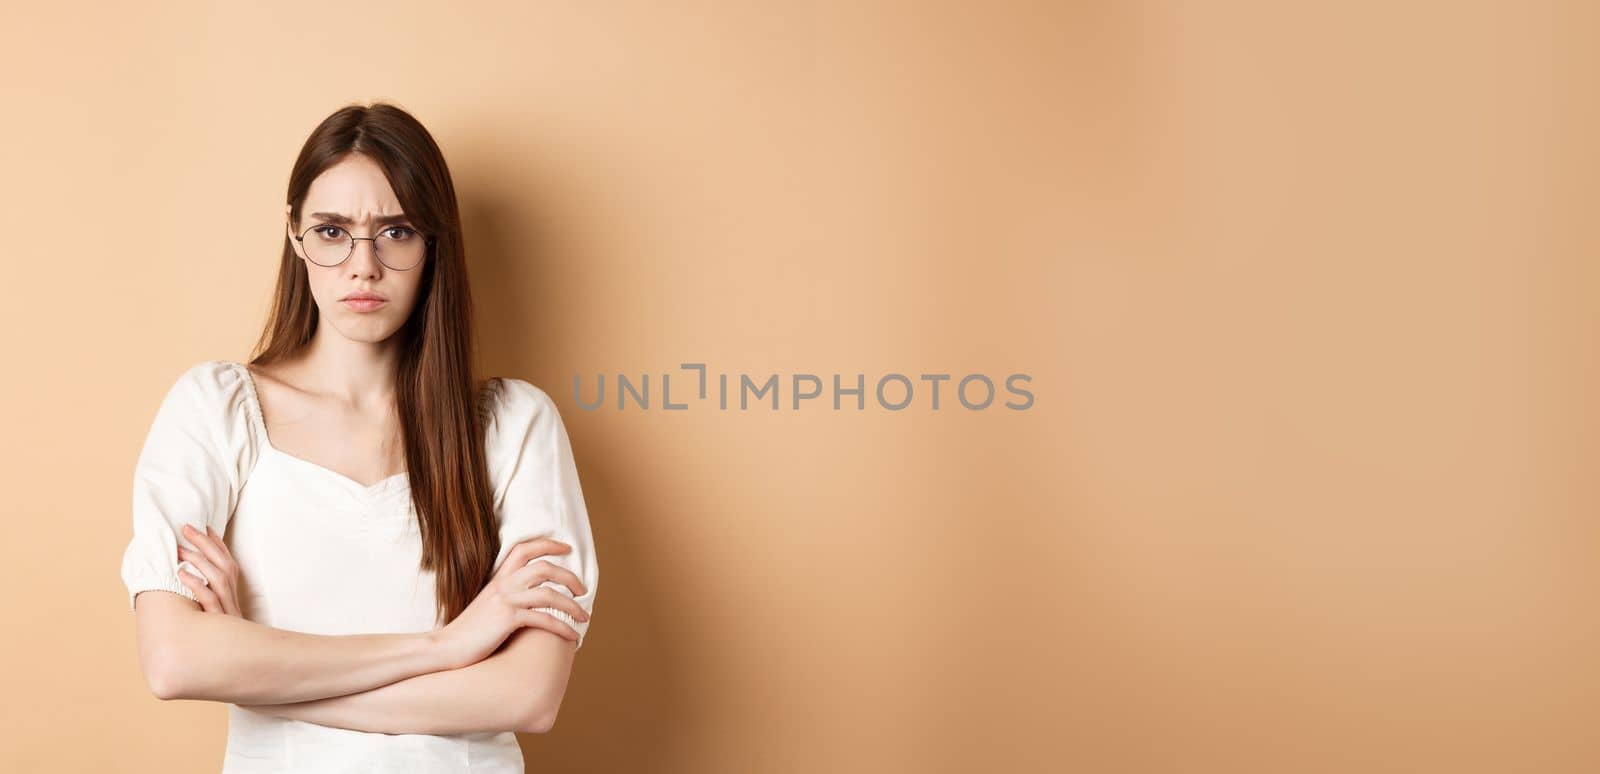 Angry and offended girl in glasses frowning, cross arms on chest and sulking, standing defensive on beige background.